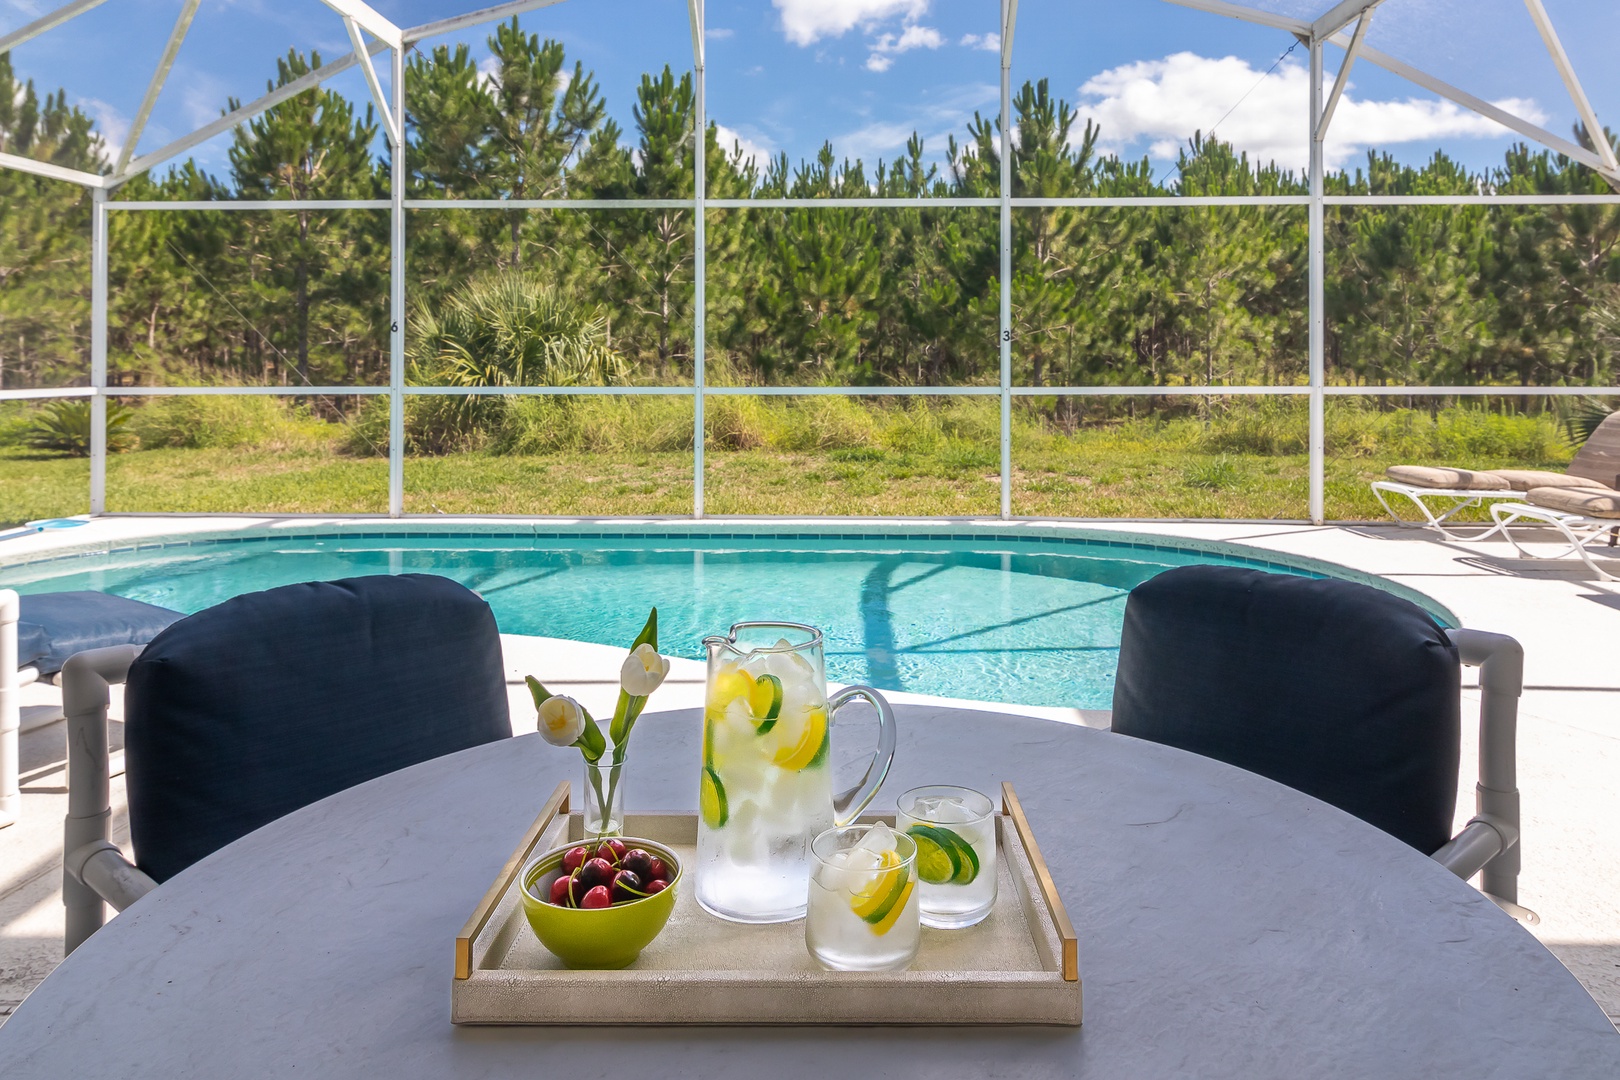 Take your favorite snacks and beverages out poolside!